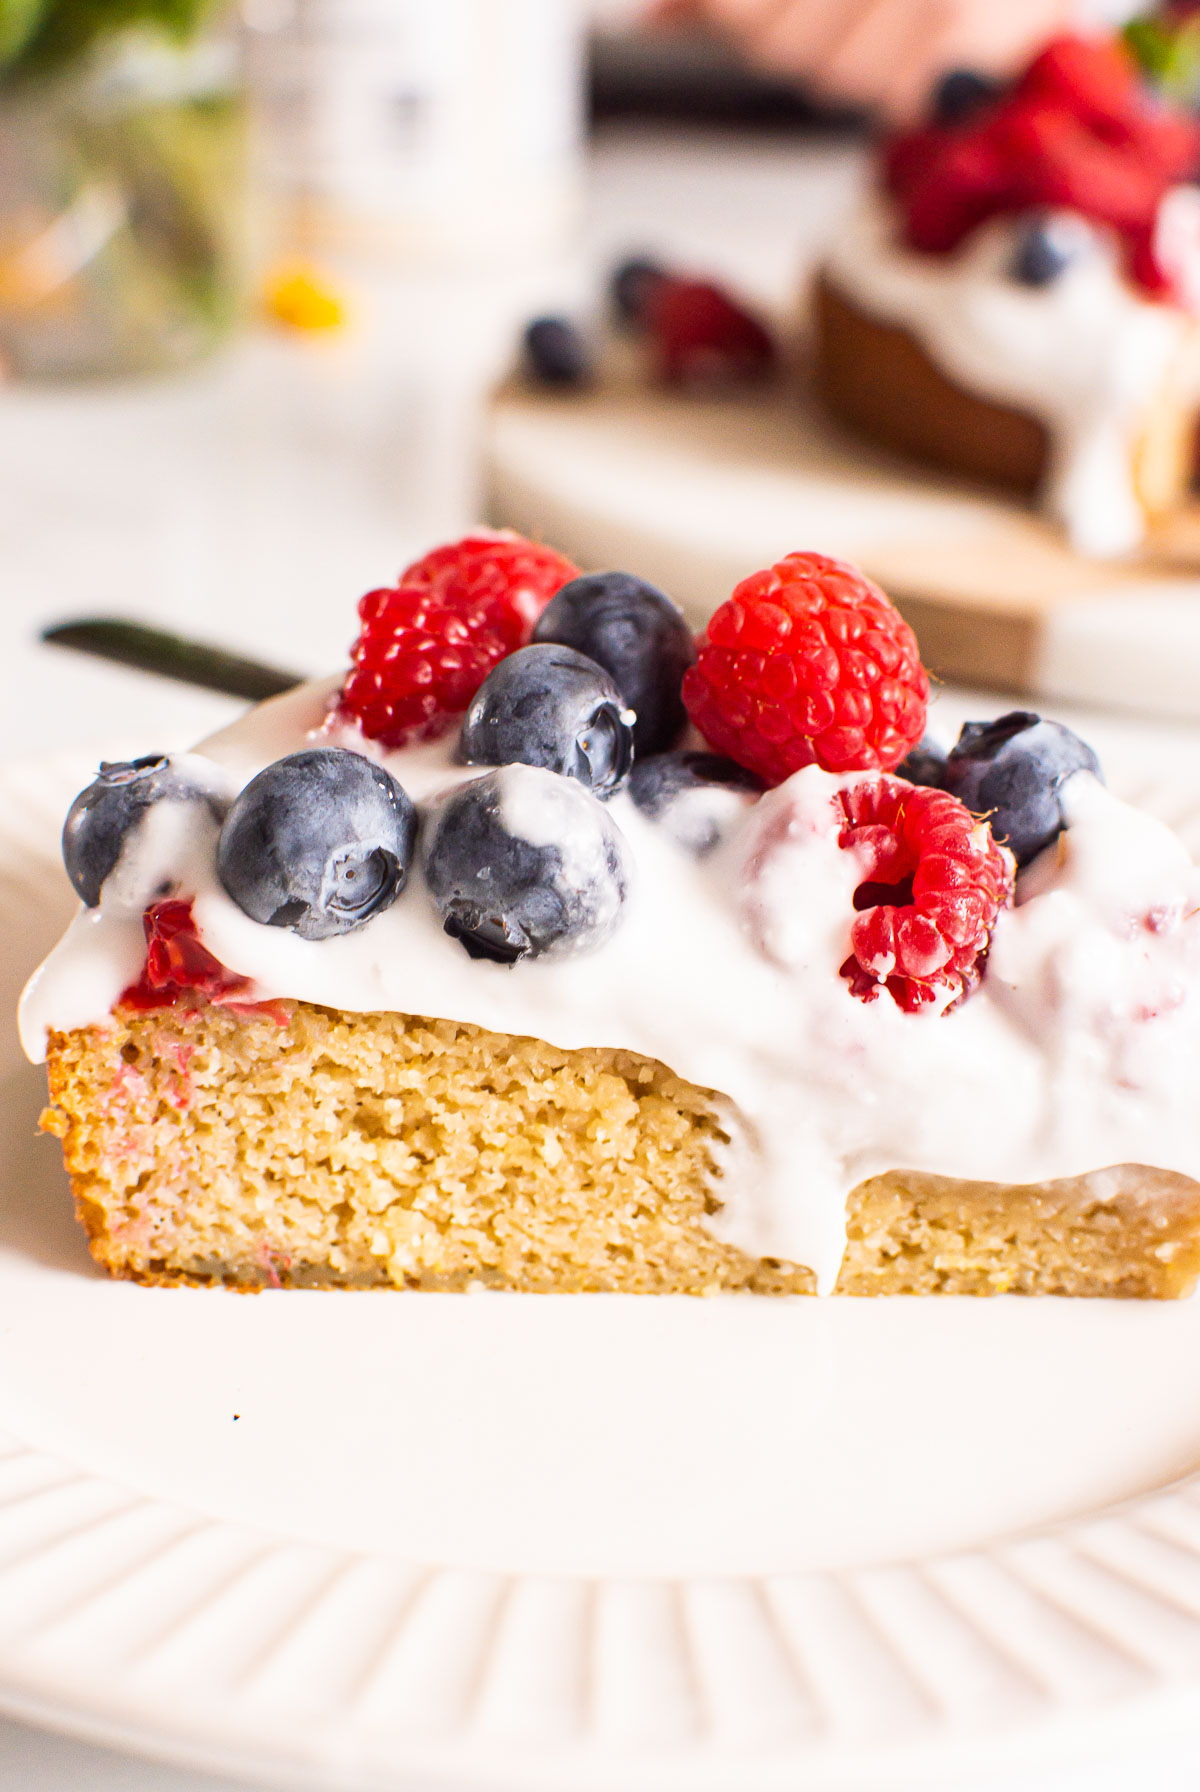 Slice of cake on plate with whipped topping, blueberries and raspberries.